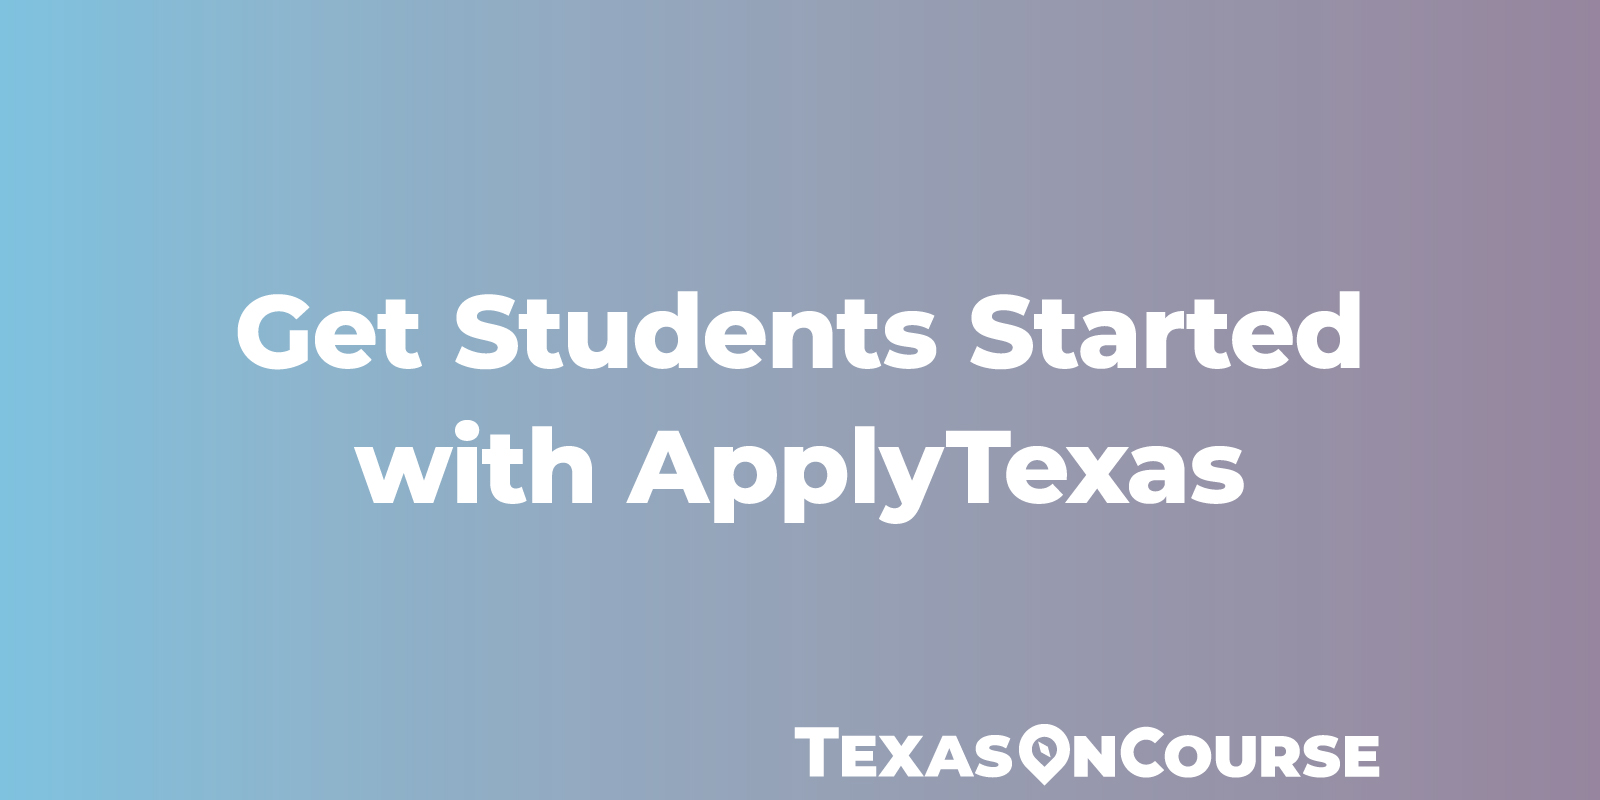 Get Students Started with ApplyTexas